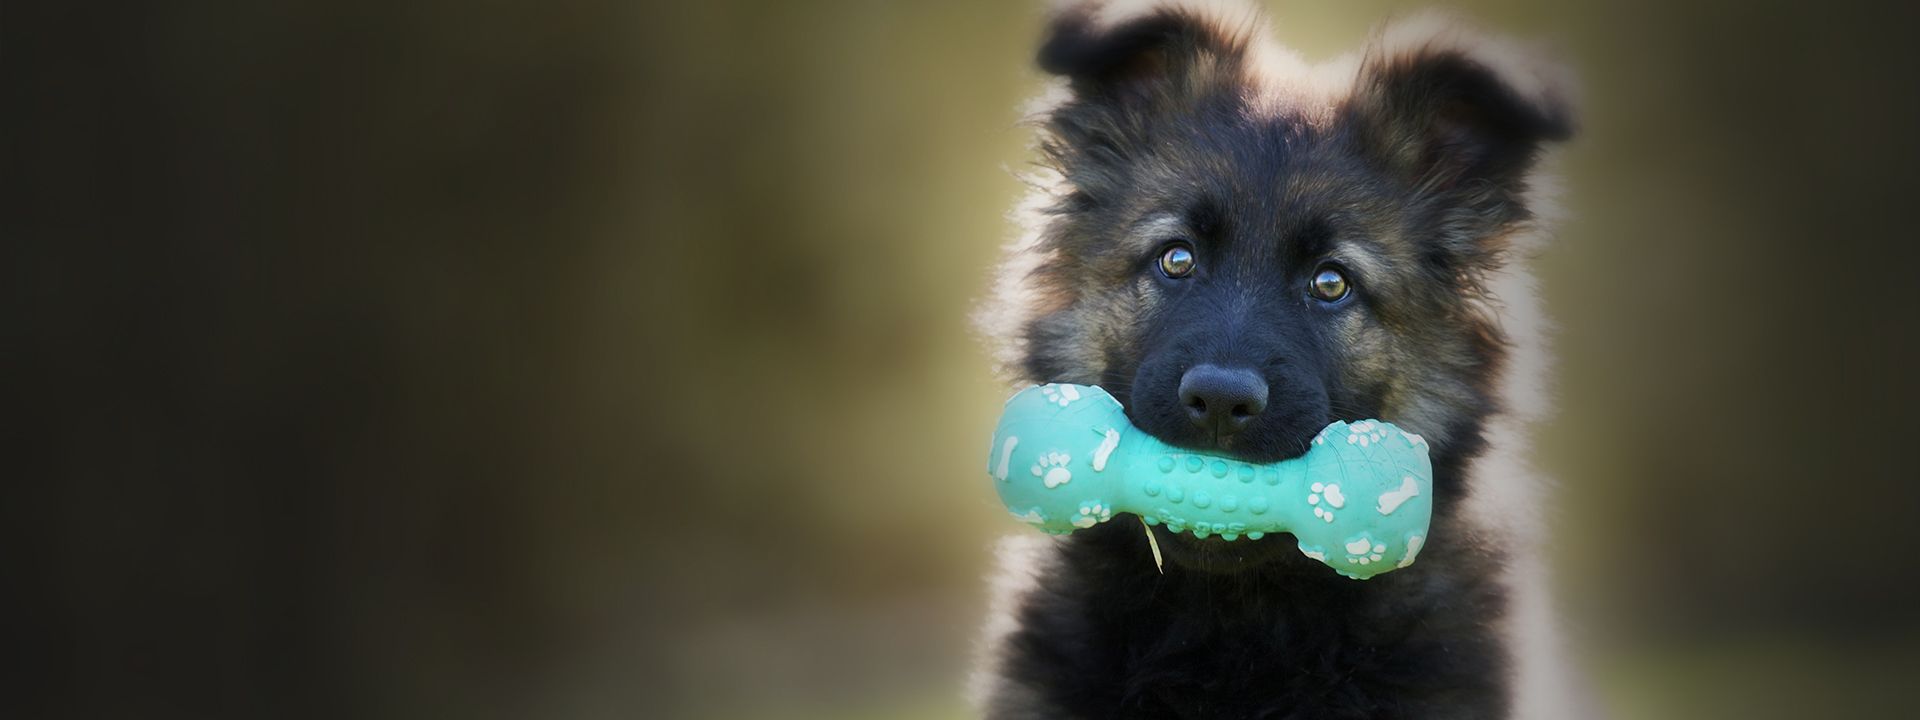 adorable puppy holding a toy